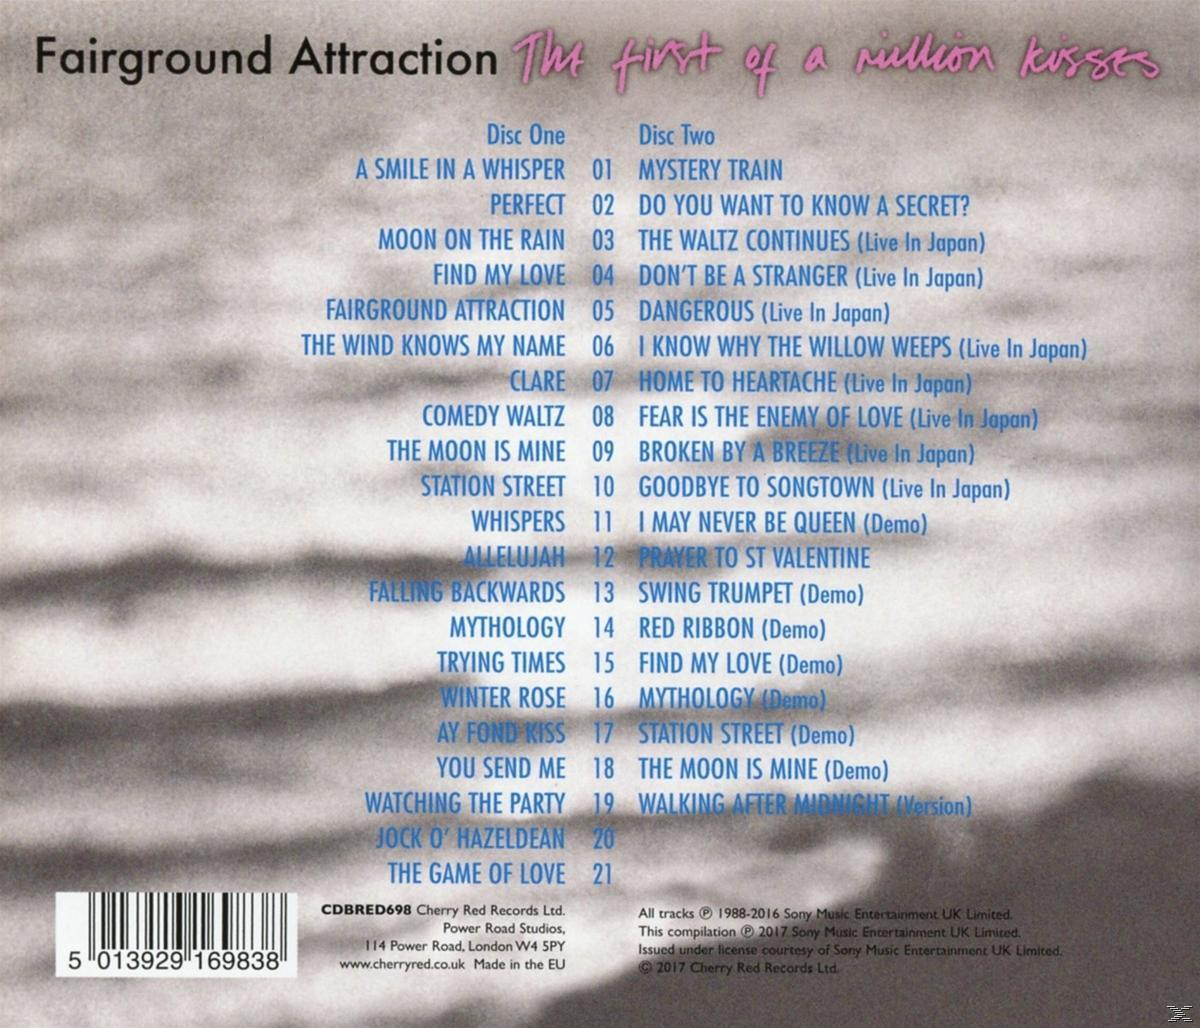 B-Sides,Demos Kisses-plus The Attraction Fairground Million (CD) First - A - Of